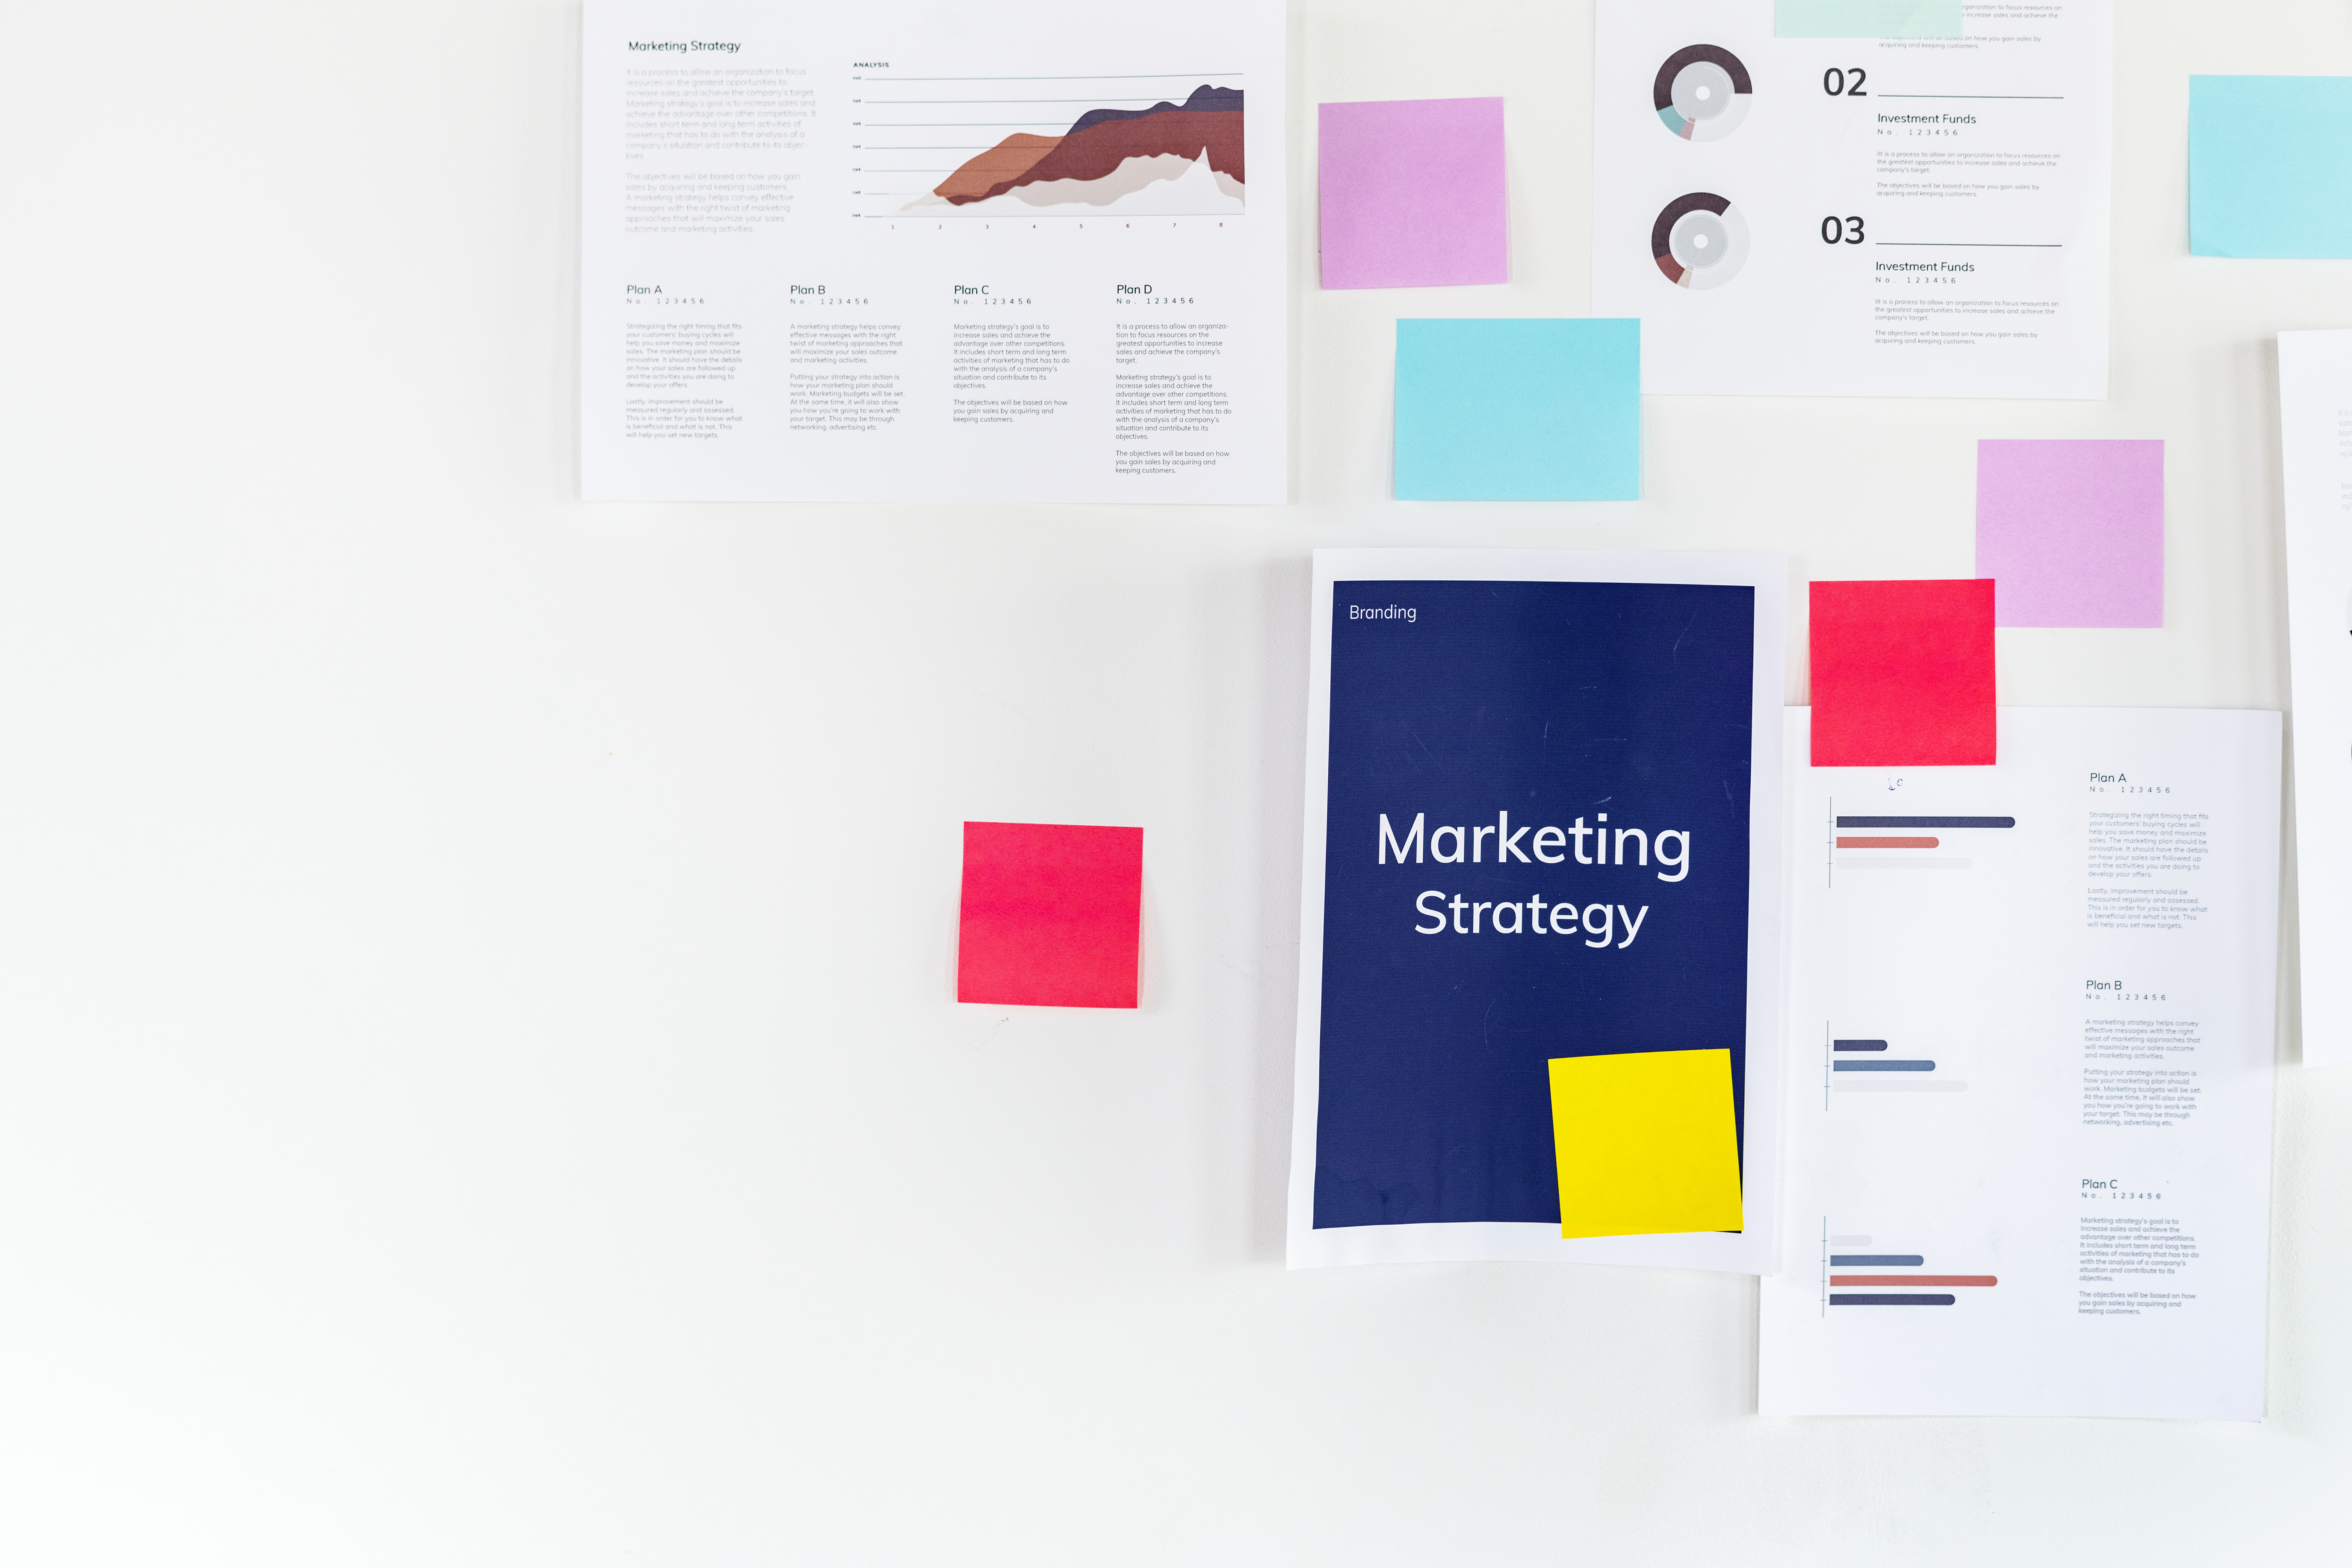 Marketing strategy plans for businesses looking to shape their marketing strategy, marketing budget and social media content